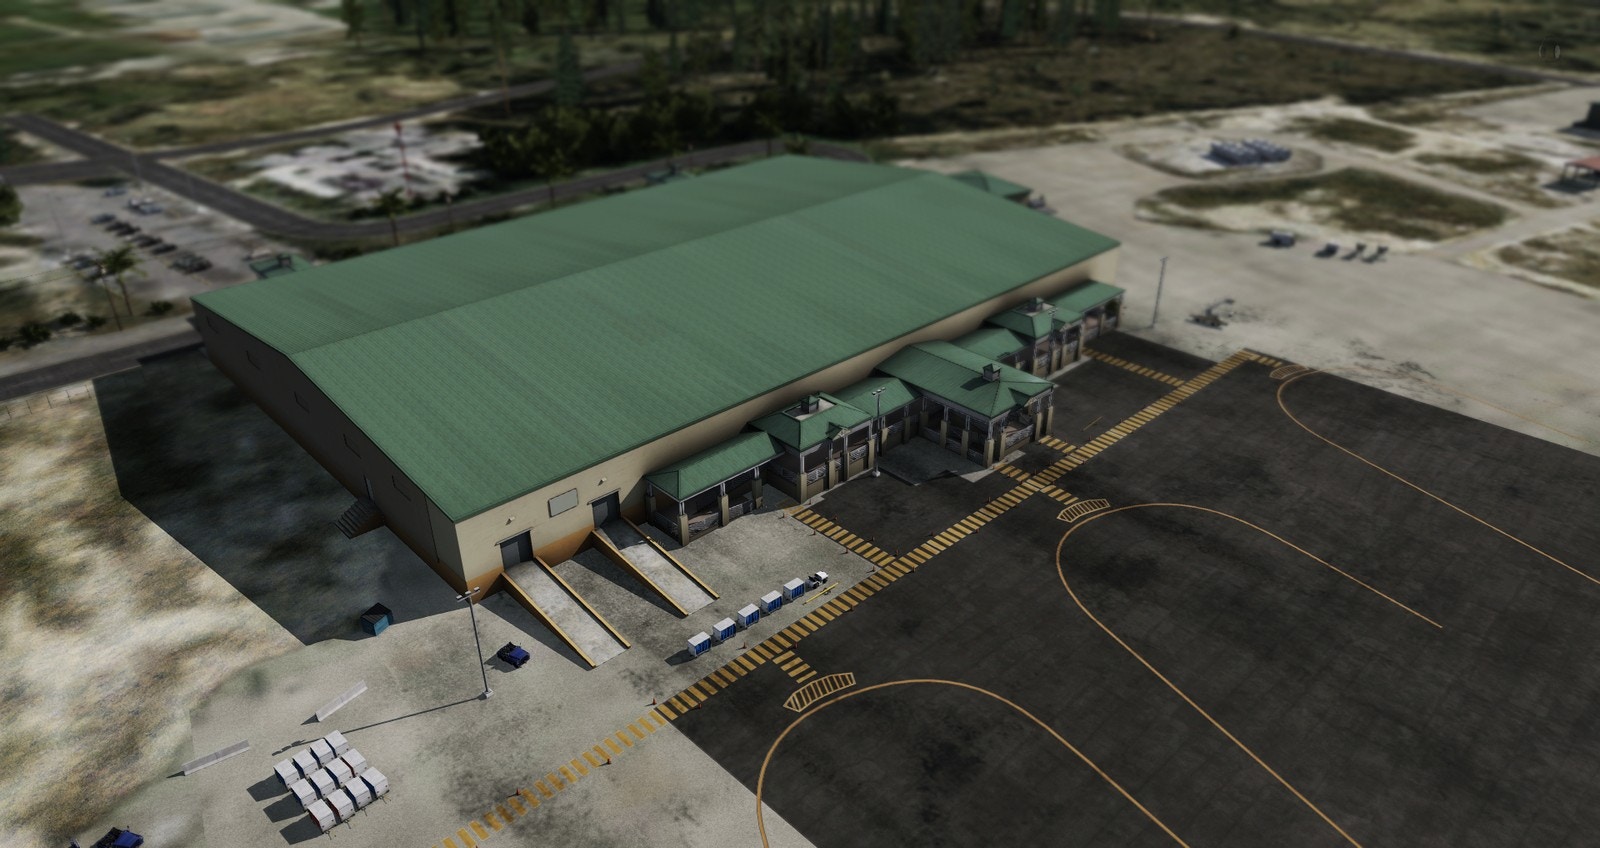 JustSim Releases Milas-Bodrum Airport for MSFS